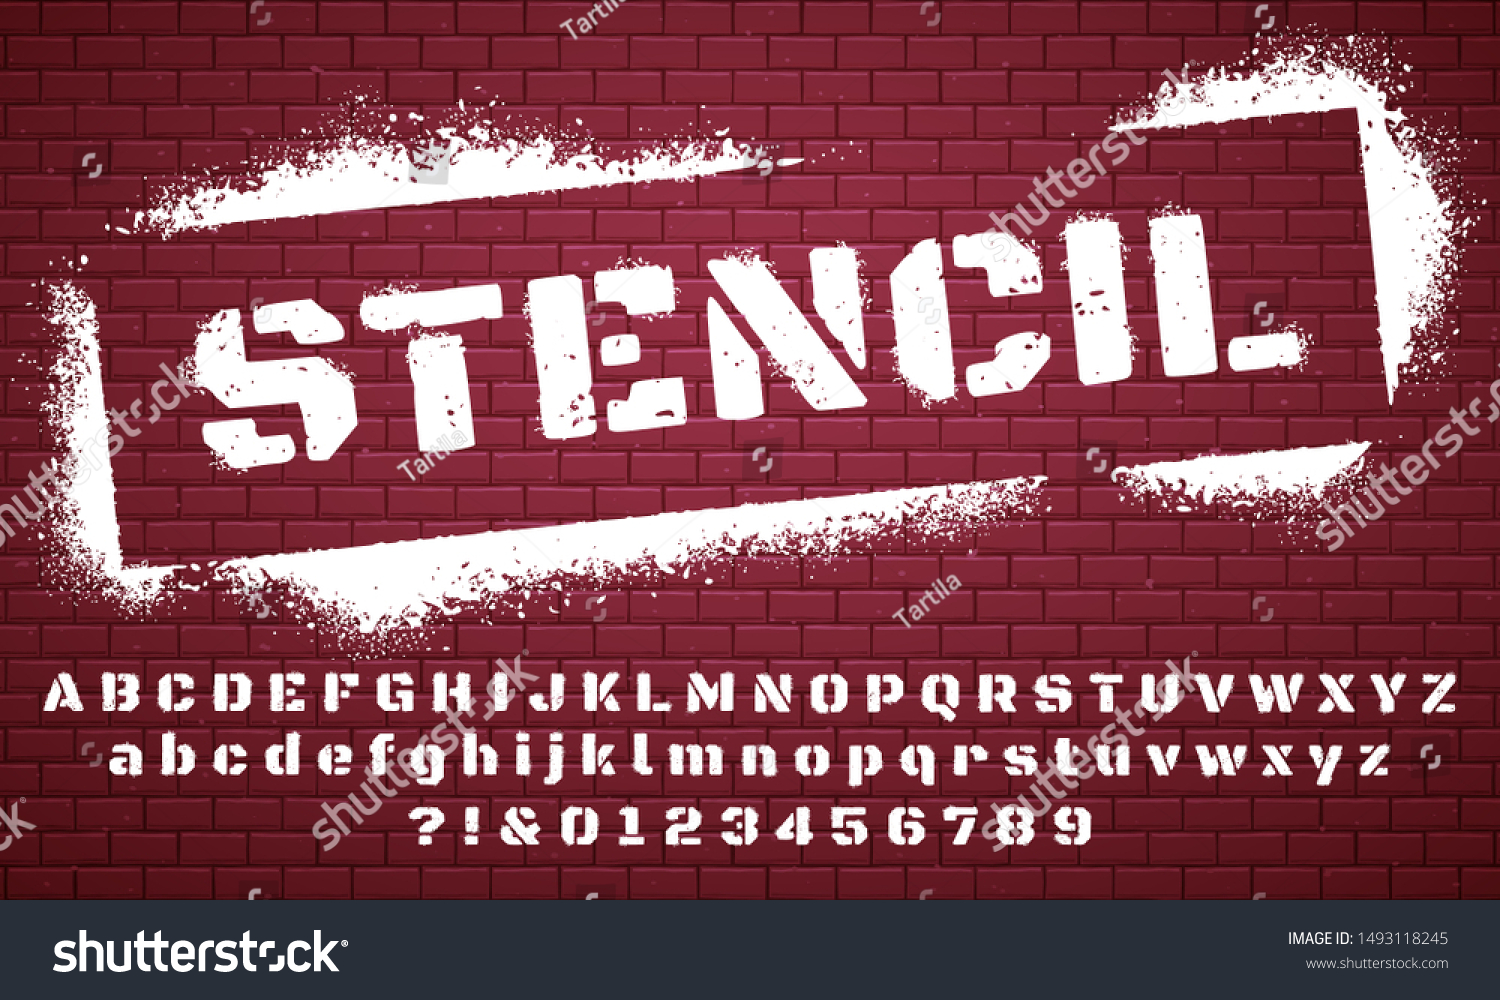 Stencil font. Graffiti spray painted alphabet, dirty textured lettering and grunge letters. Military abc and numbers, stamp type army scratched text. Isolated vector symbols set #1493118245